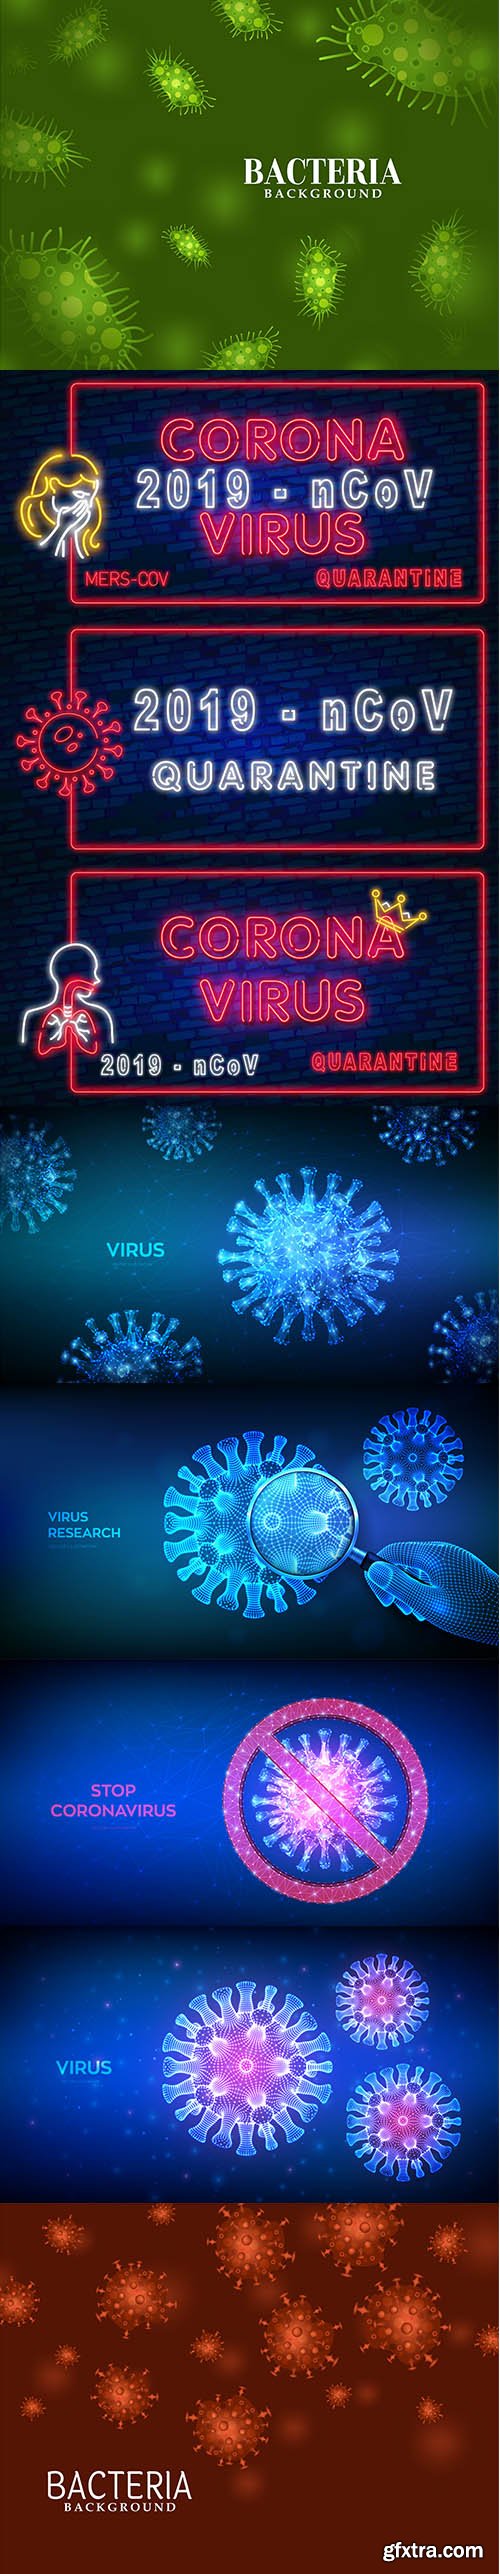 Abstract Concept Microscopic View Virus Cells Illustration